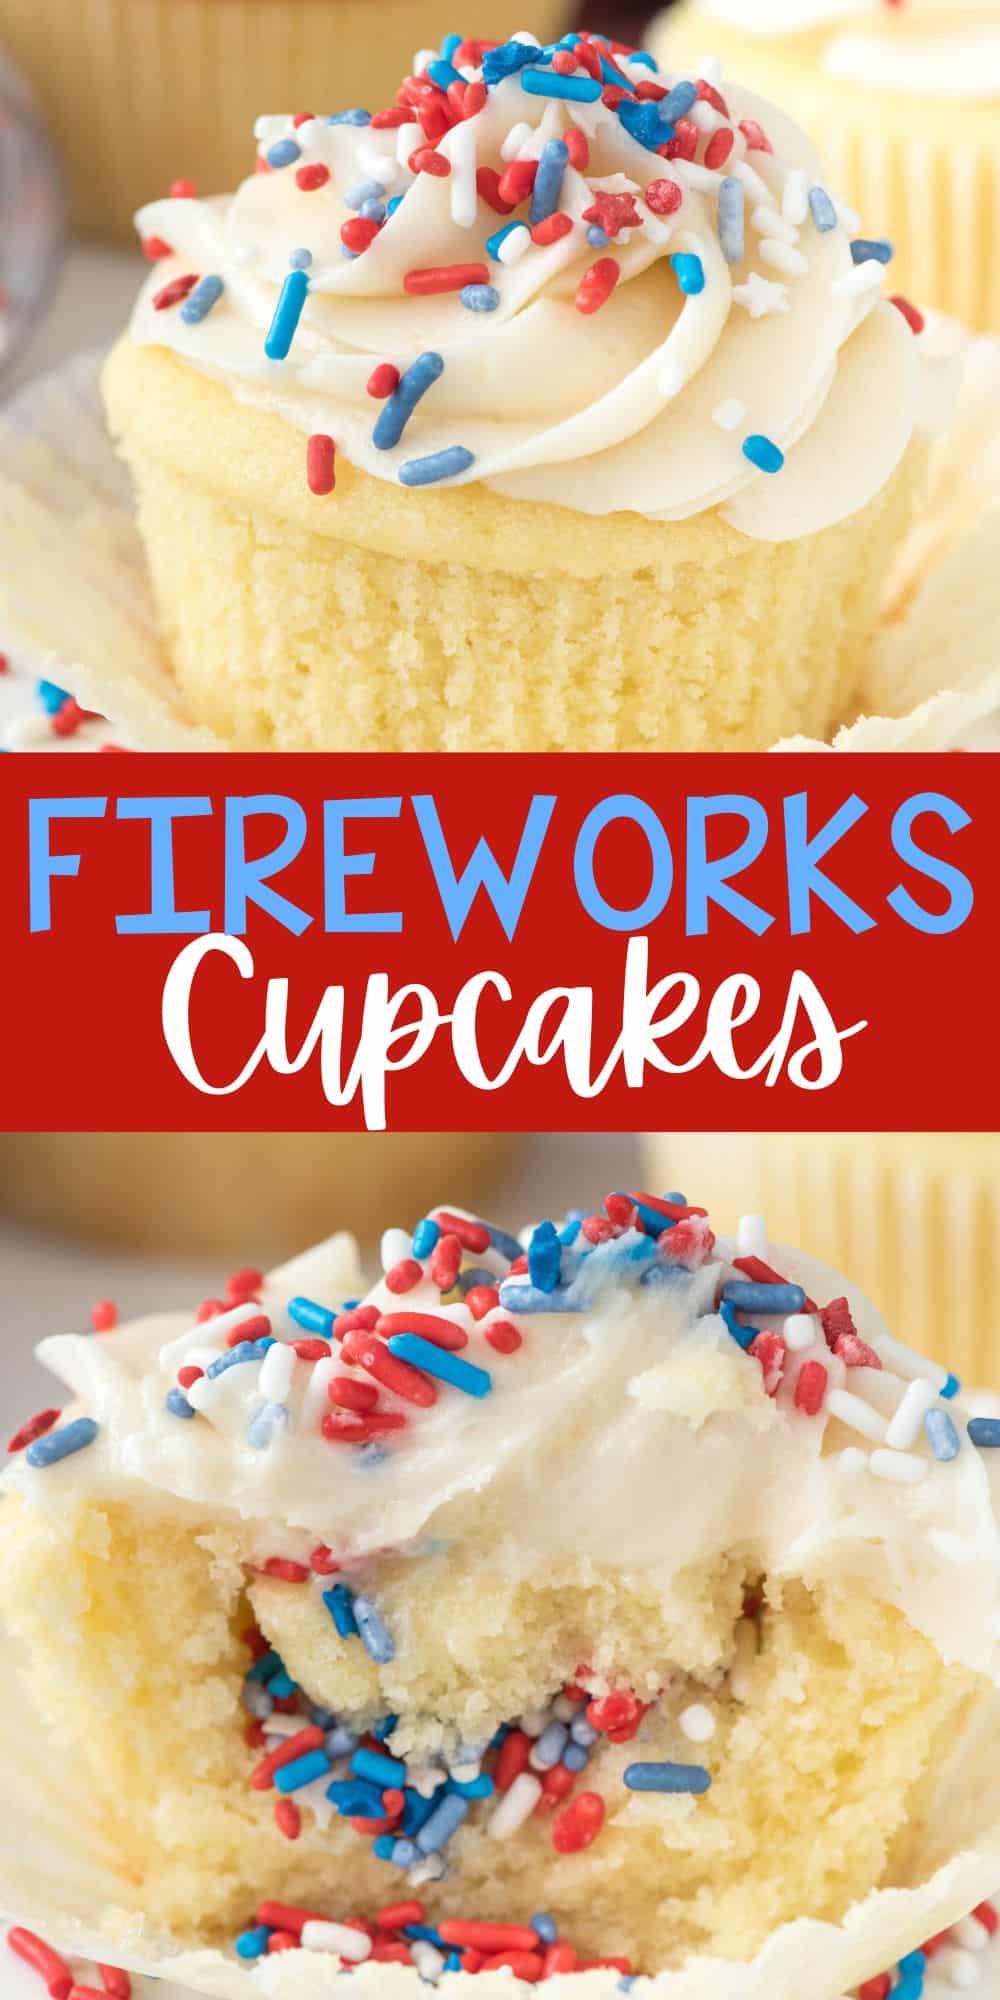 two photos cupcakes covered in red white and blue sprinkles and white frosting words on the image.